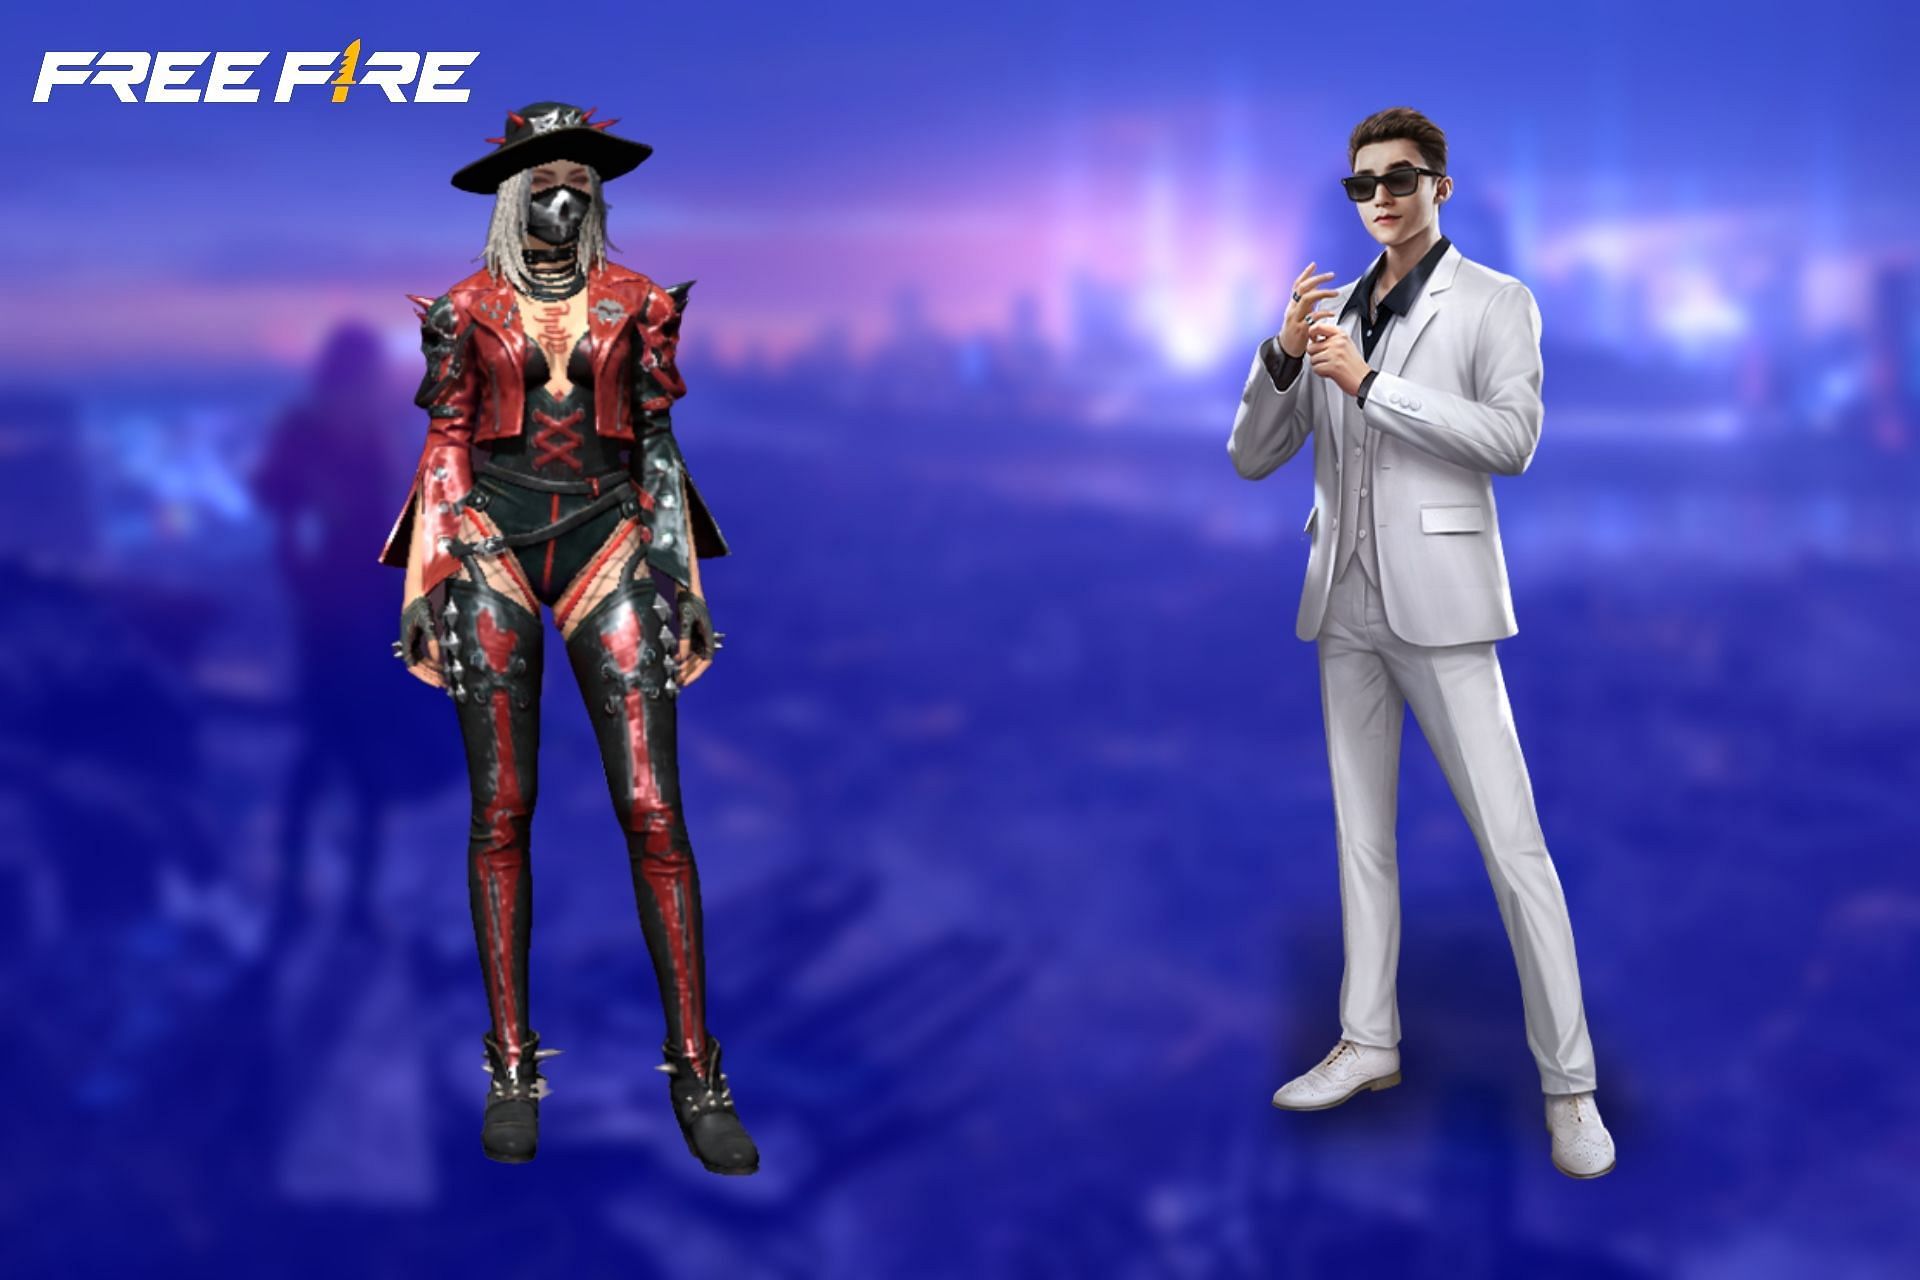 free-fire-redeem-codes-today-october-31-2022-latest-ff-codes-to-get-free-costume-bundles-and-characters